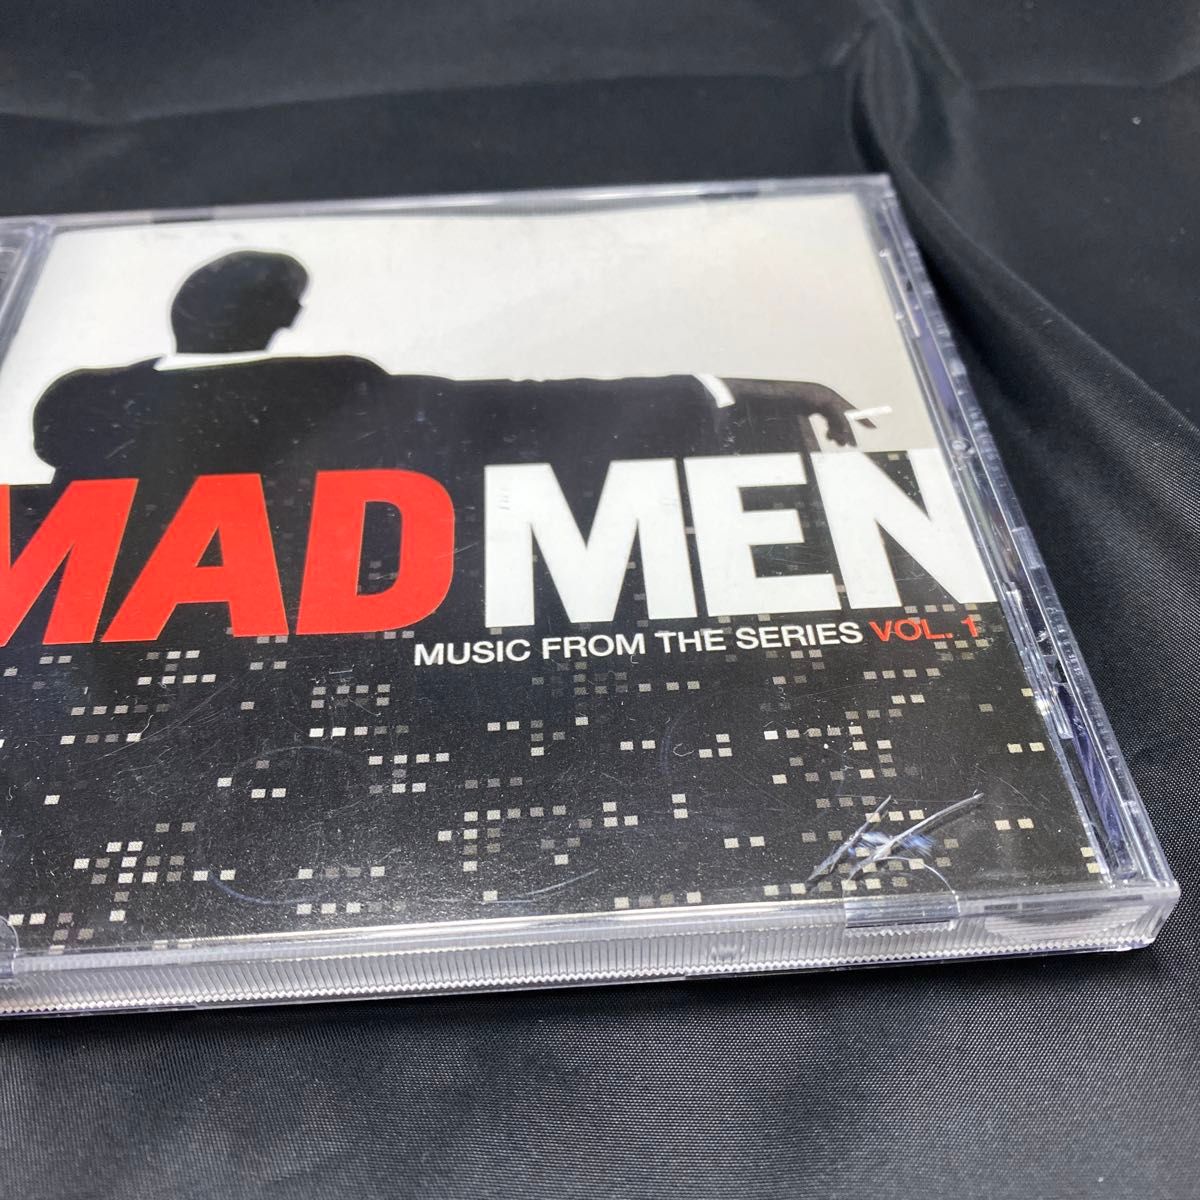 MADMEN MUSIC FROM THE SERIES vol.1